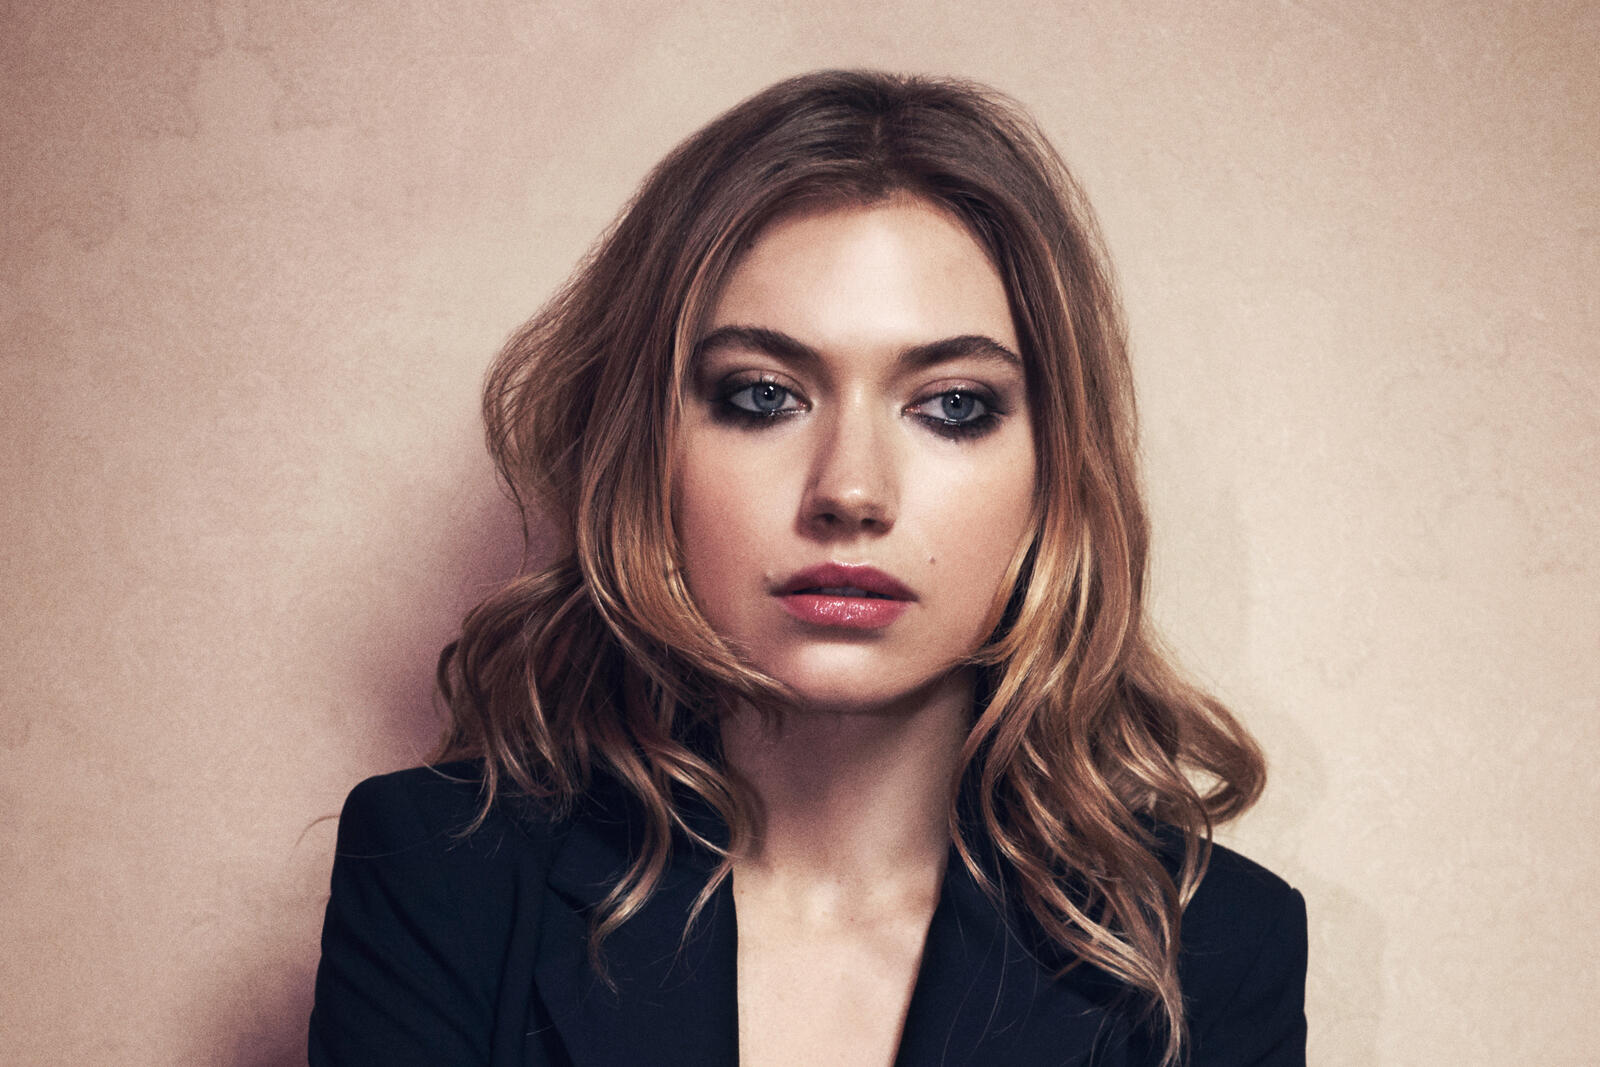 Wallpapers actress young Imogen Poots on the desktop